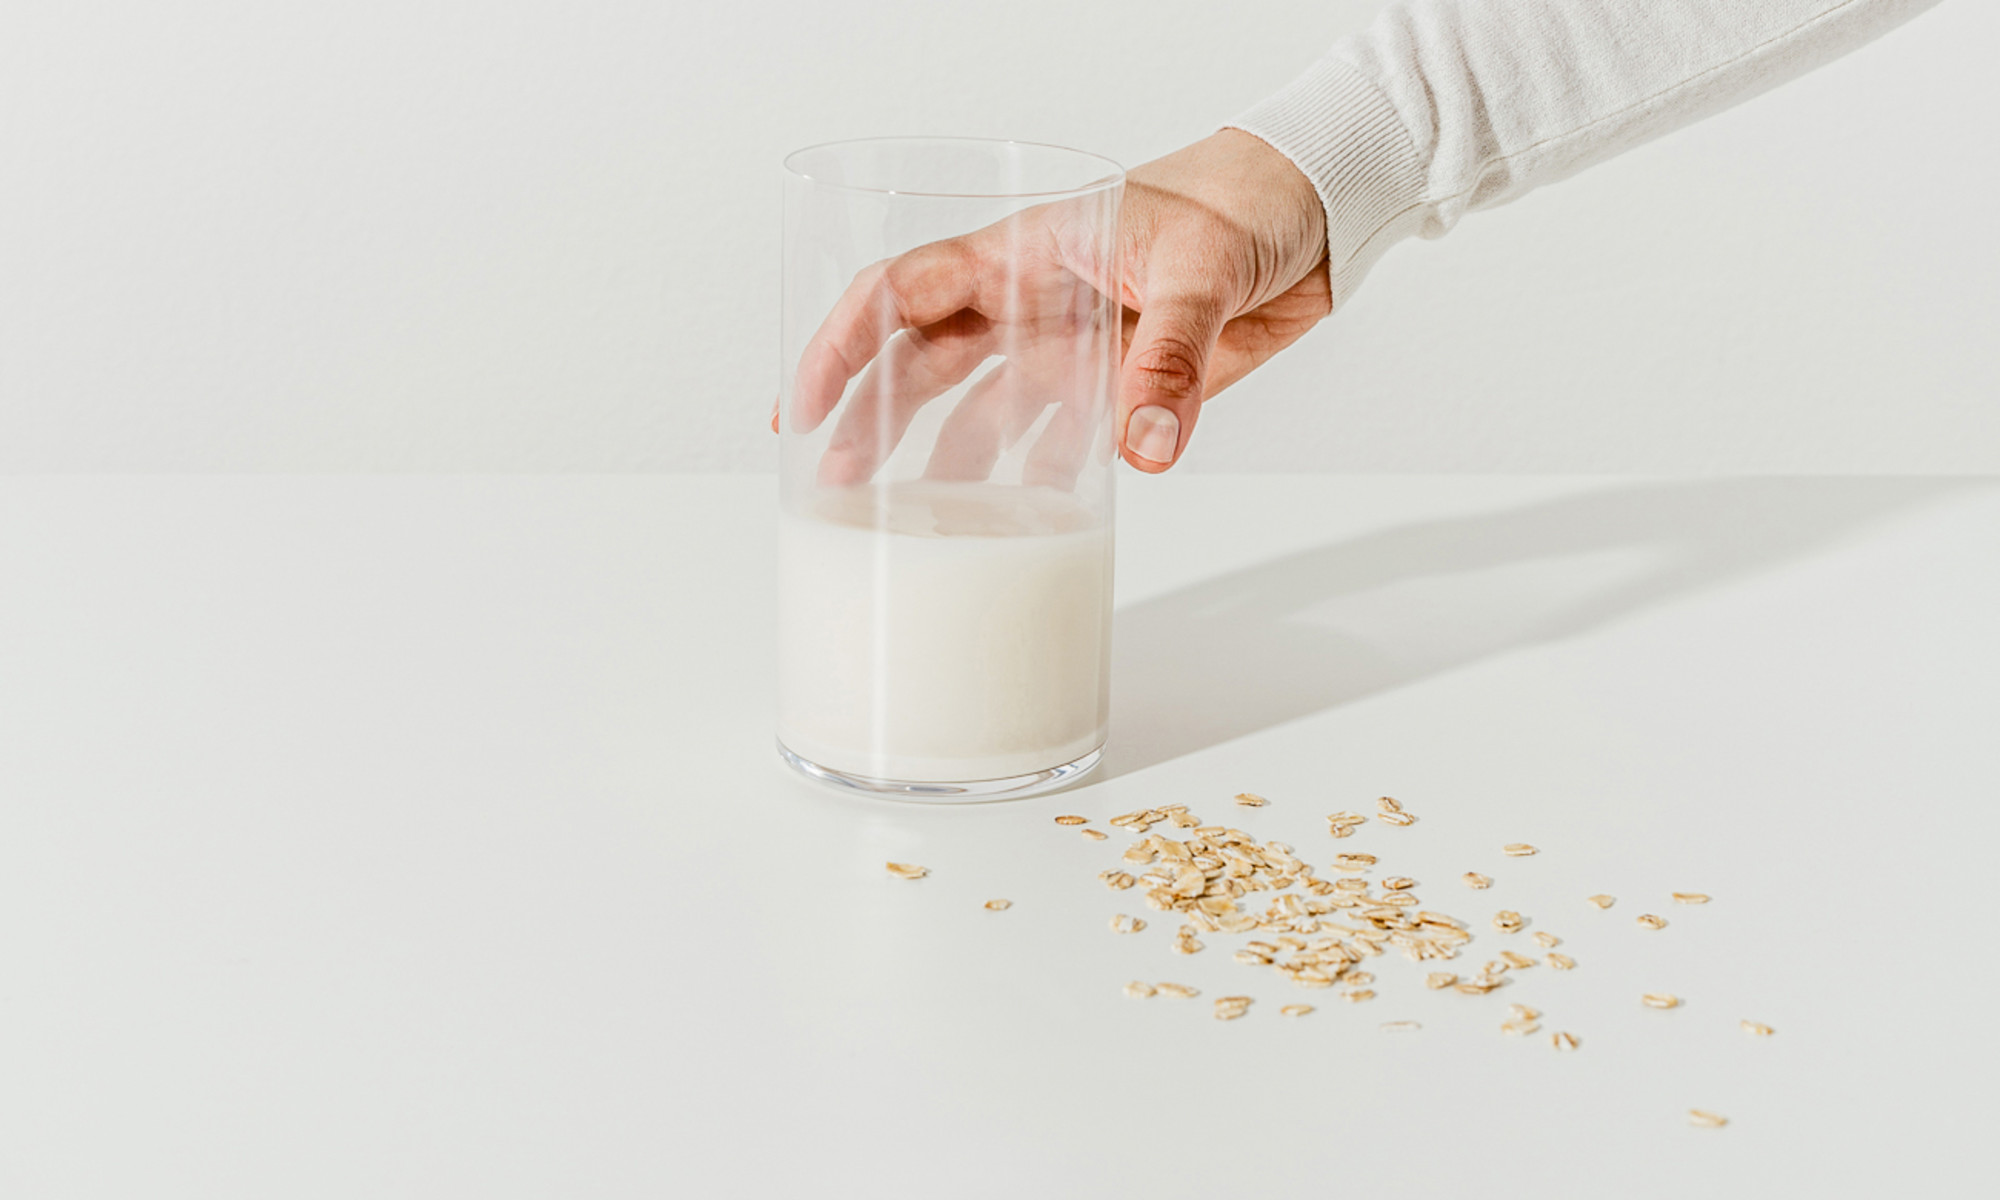 Yes, You Can Make Your Own Nut "Milk" Without A Strainer—Here's How